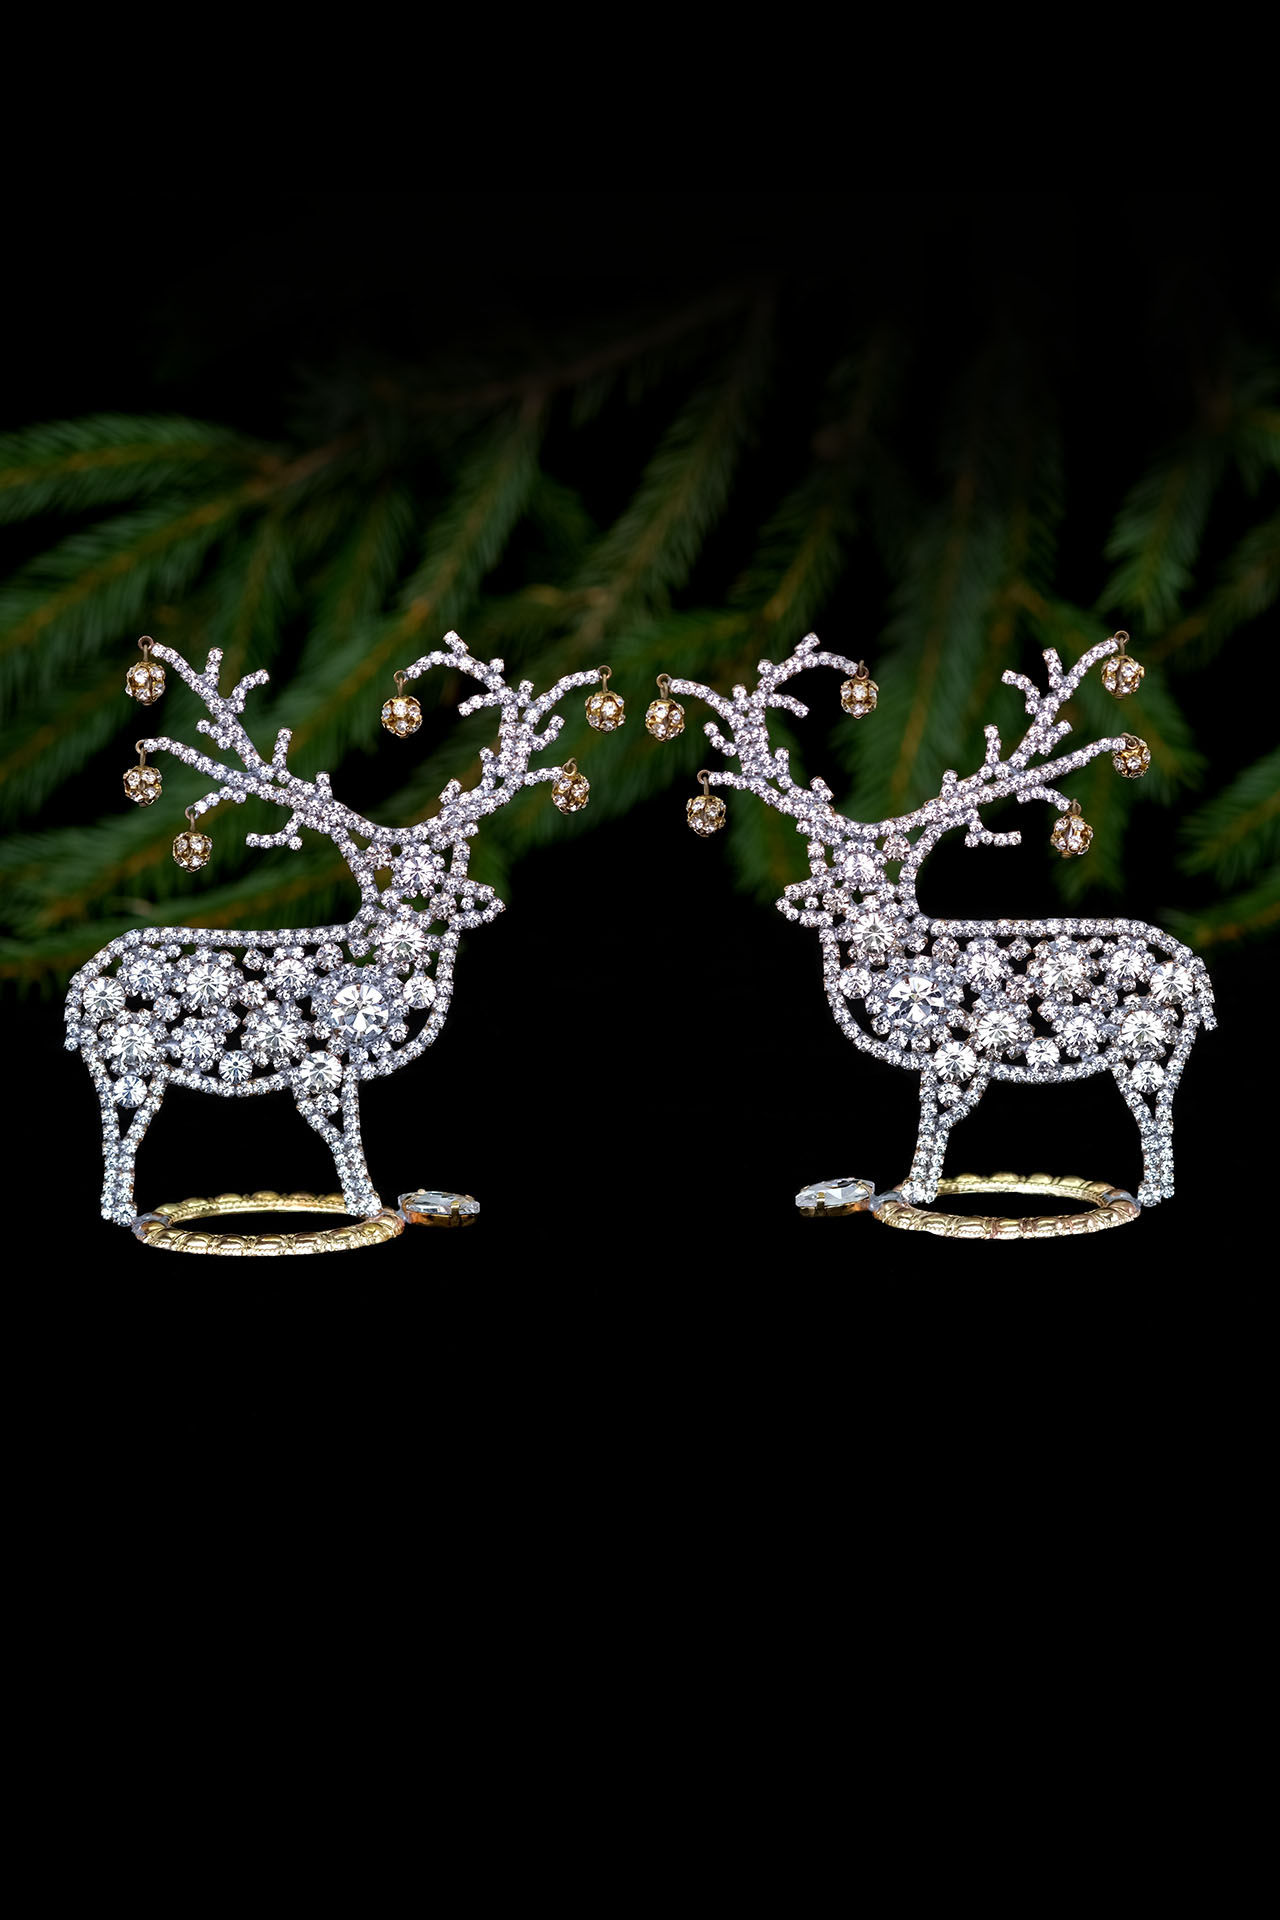 Reindeers with adorensed antlers - decorating for christmas